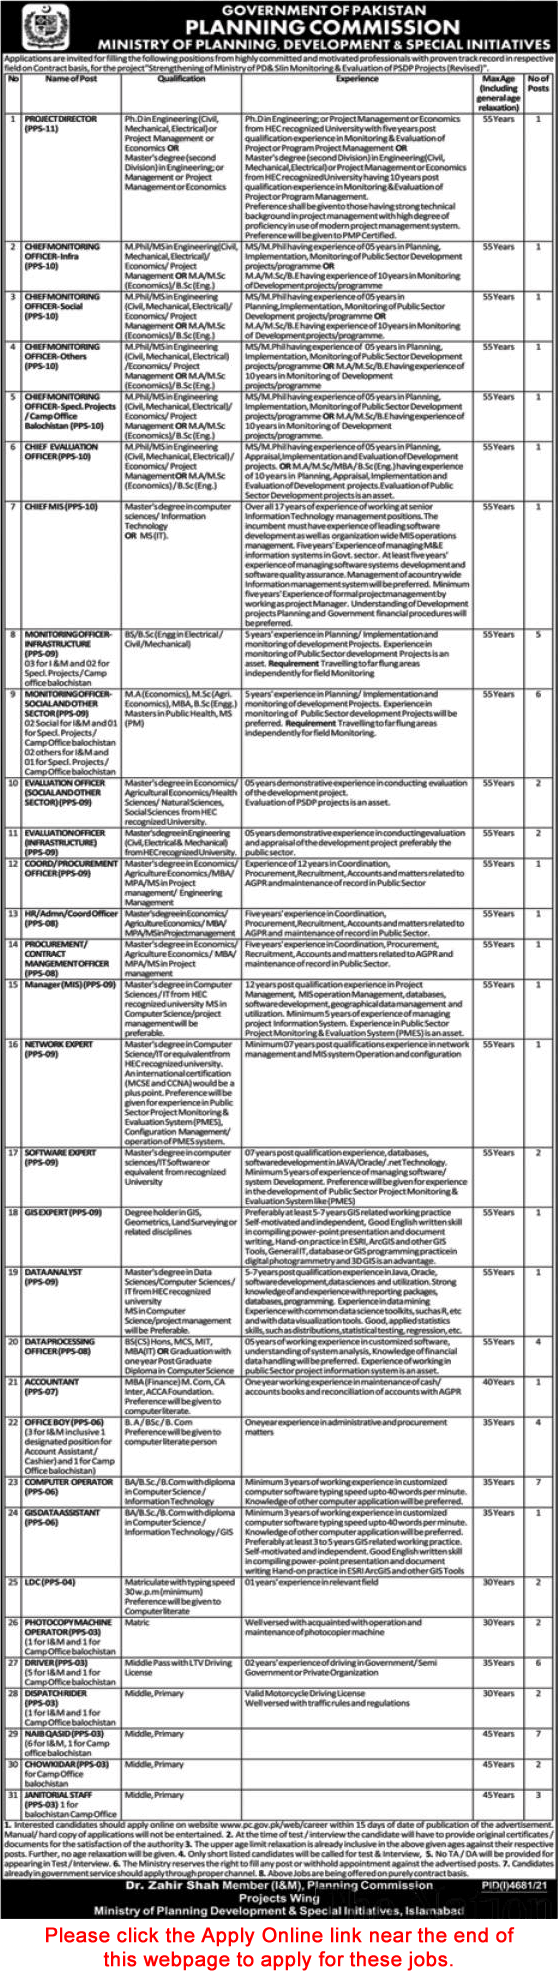 Ministry of Planning Development and Special Initiatives Jobs 2022 Planning Commission Apply Online Latest